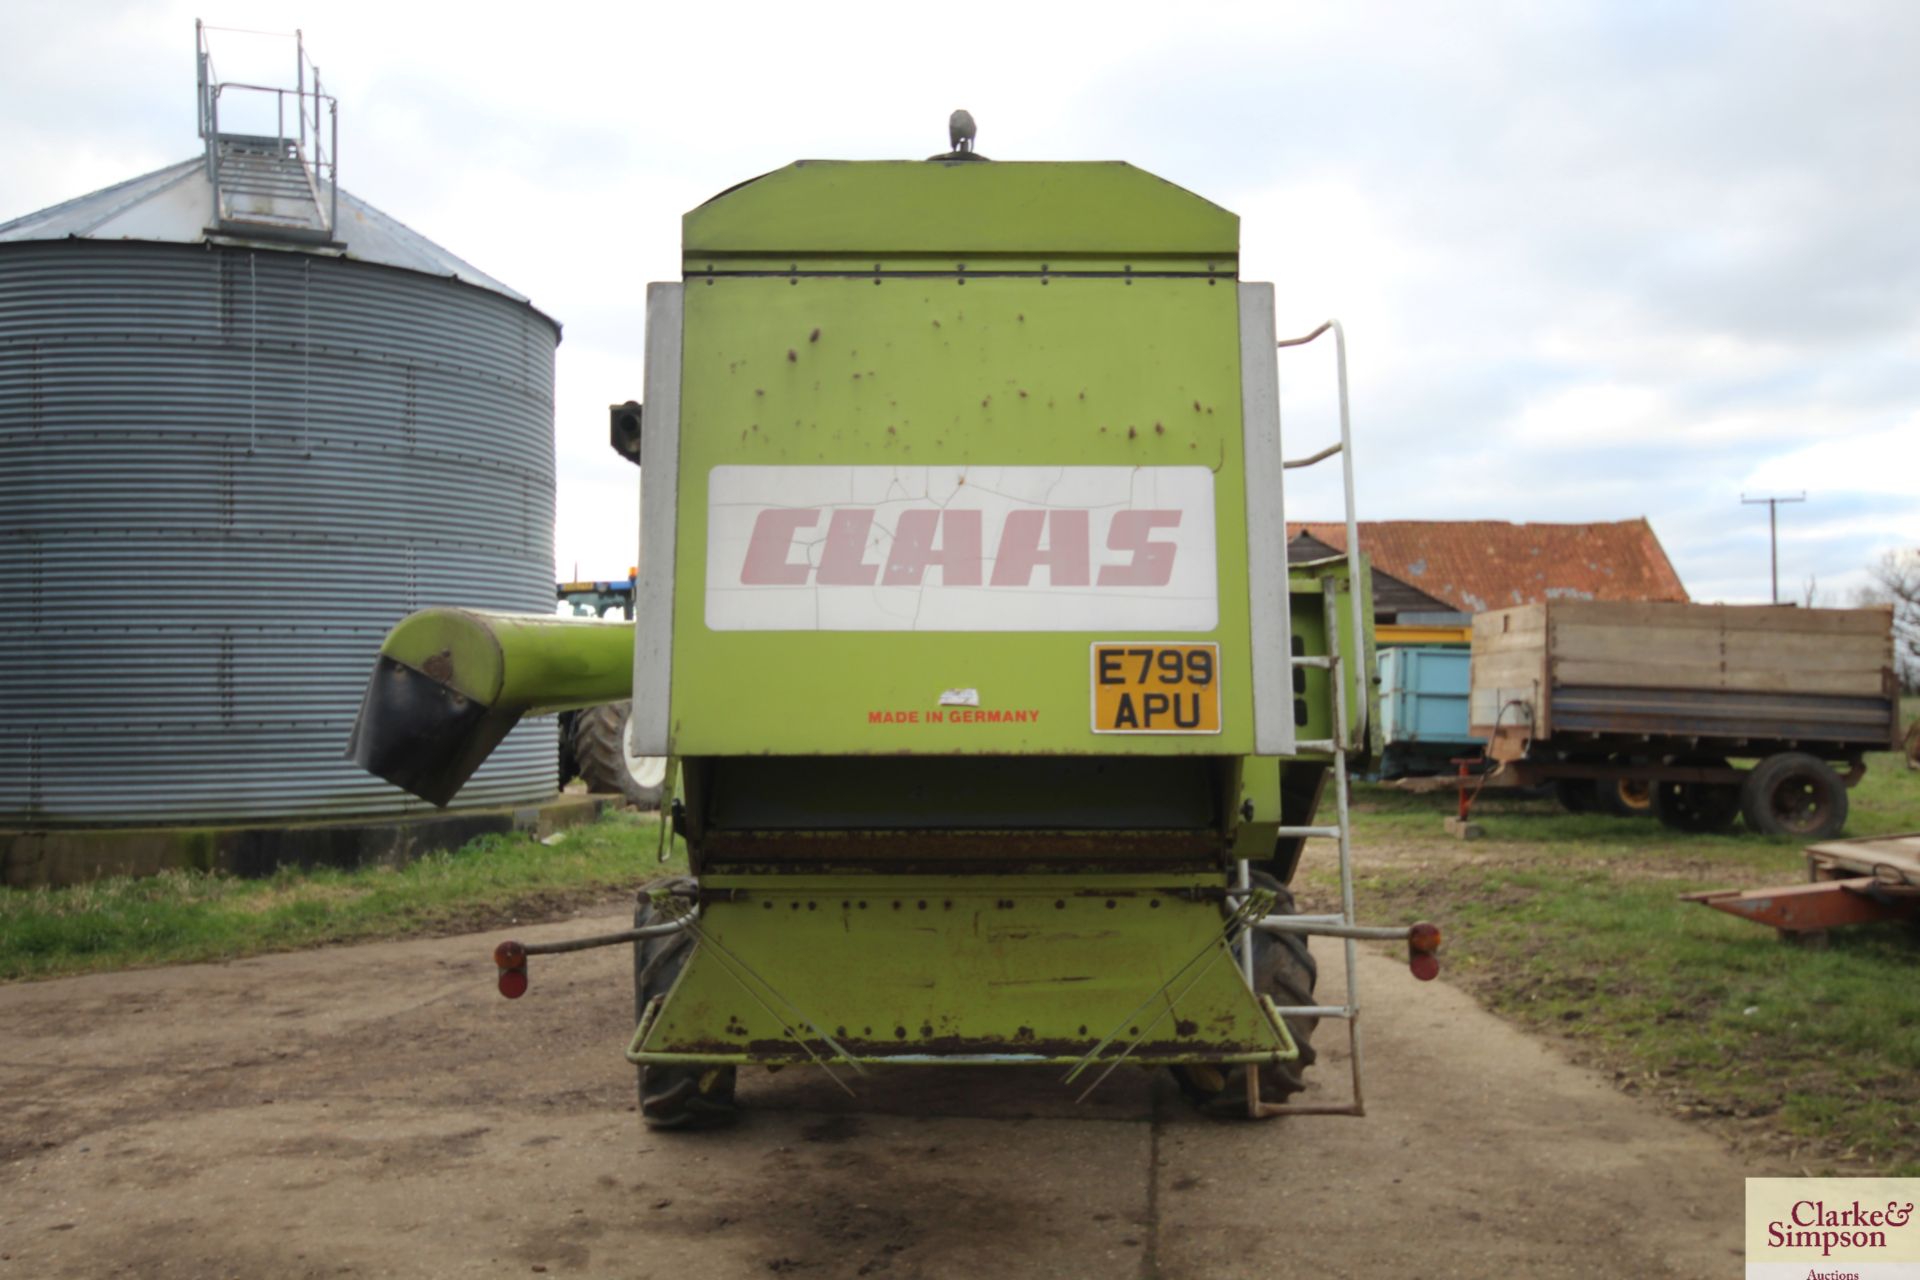 ** UPDATED HOURS ** Claas Dominator 98S combine. Registration E799 APU. Date of first registration - Image 4 of 120